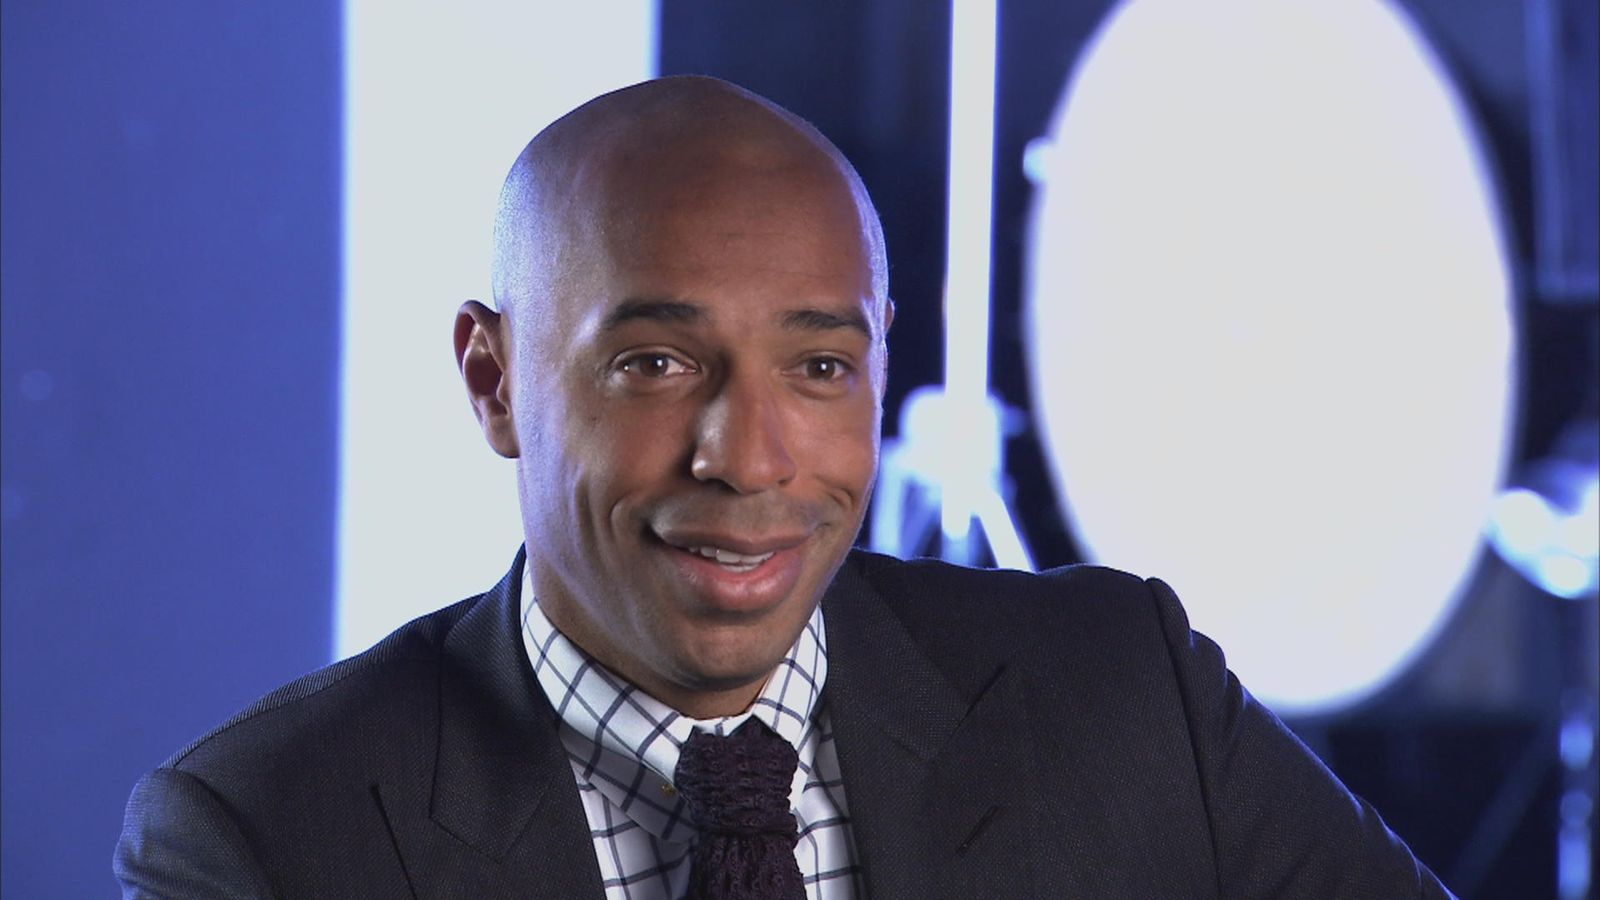 Thierry Henry retires from football and joins Sky Sports from